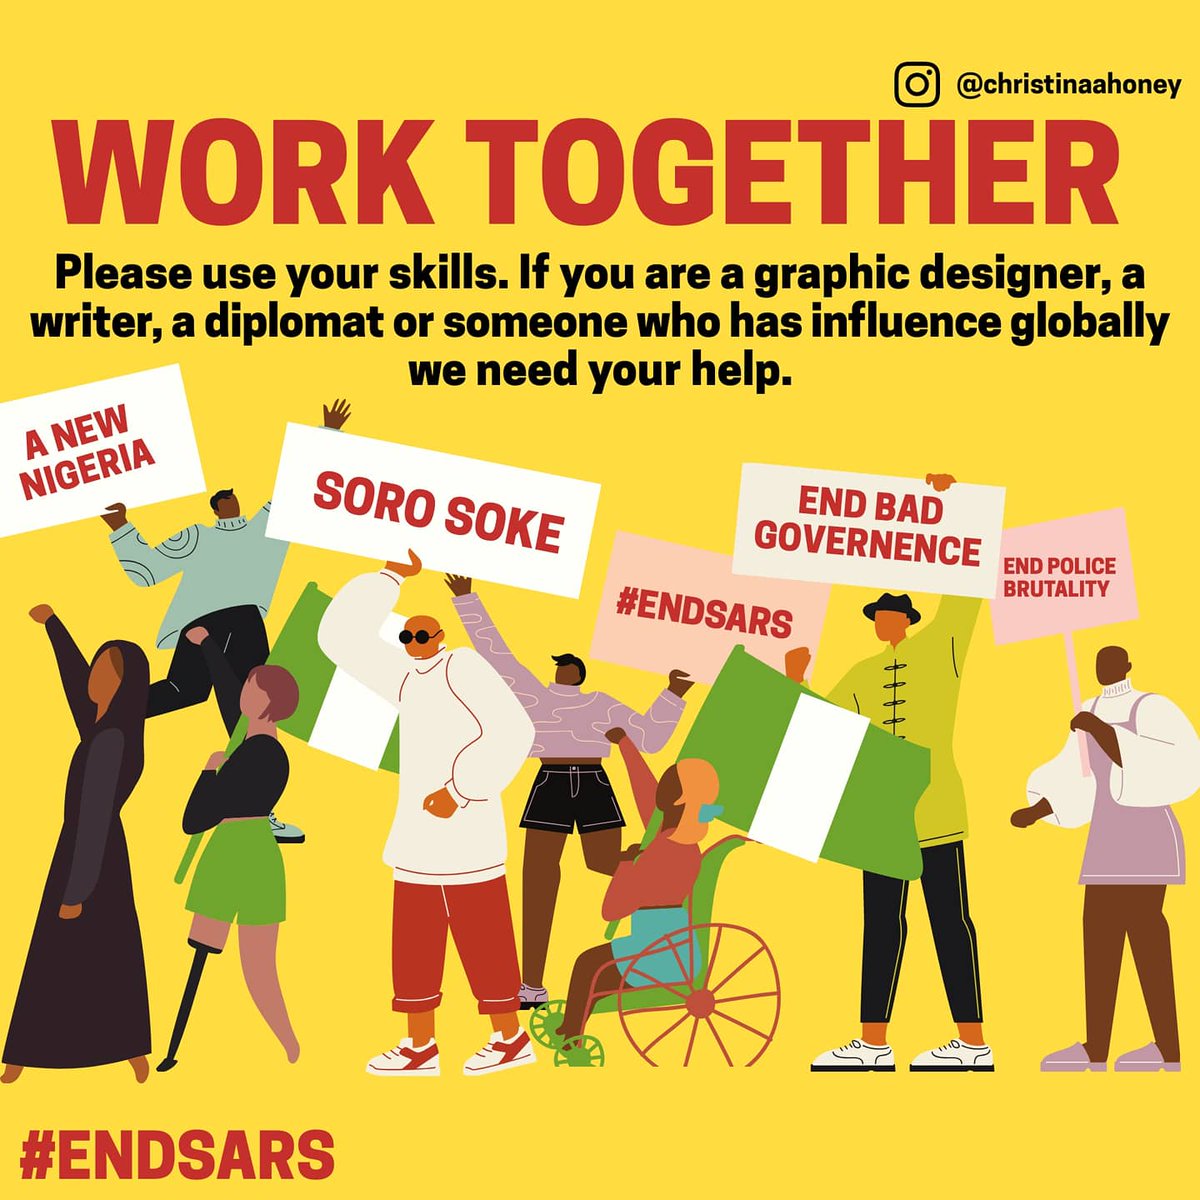 WORK TOGETHERWe need help globally. If you have a skill or influence that is beneficial please use it. AND SHARE THIS THREAD.THANK YOU! #ENDSARS  